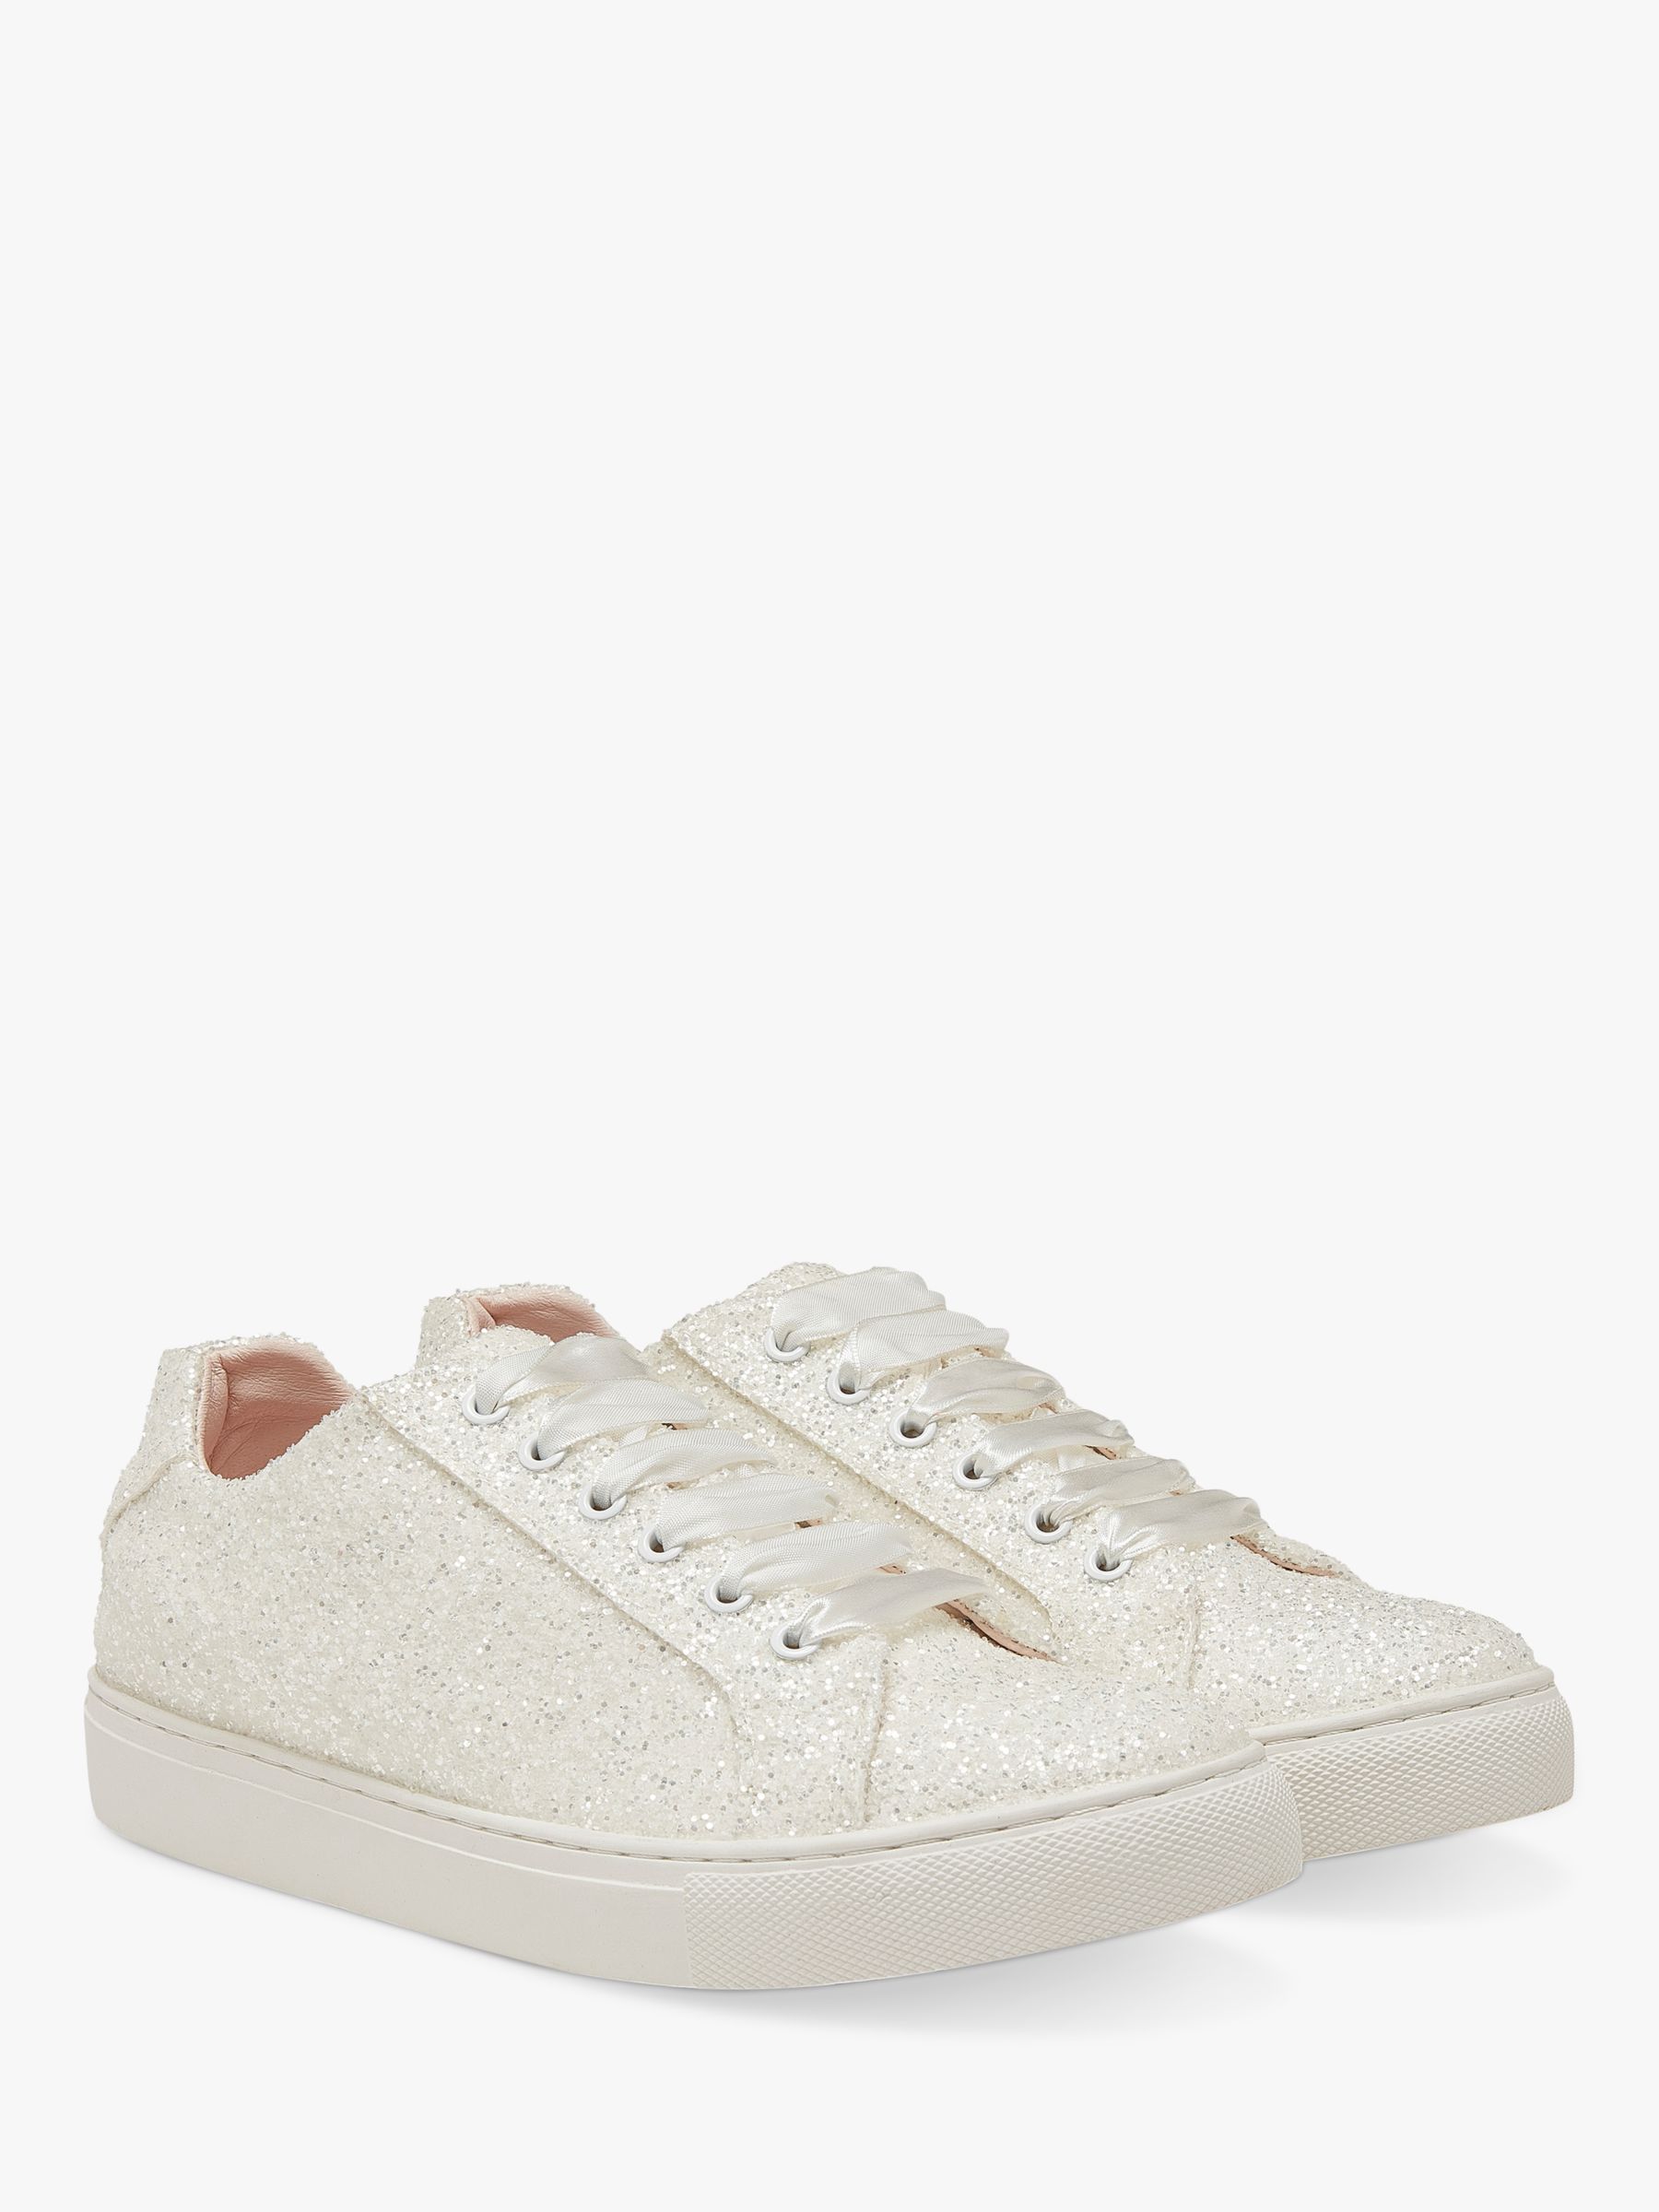 Buy Rainbow Club Athena Glitter Trainers, Ivory Snow Online at johnlewis.com